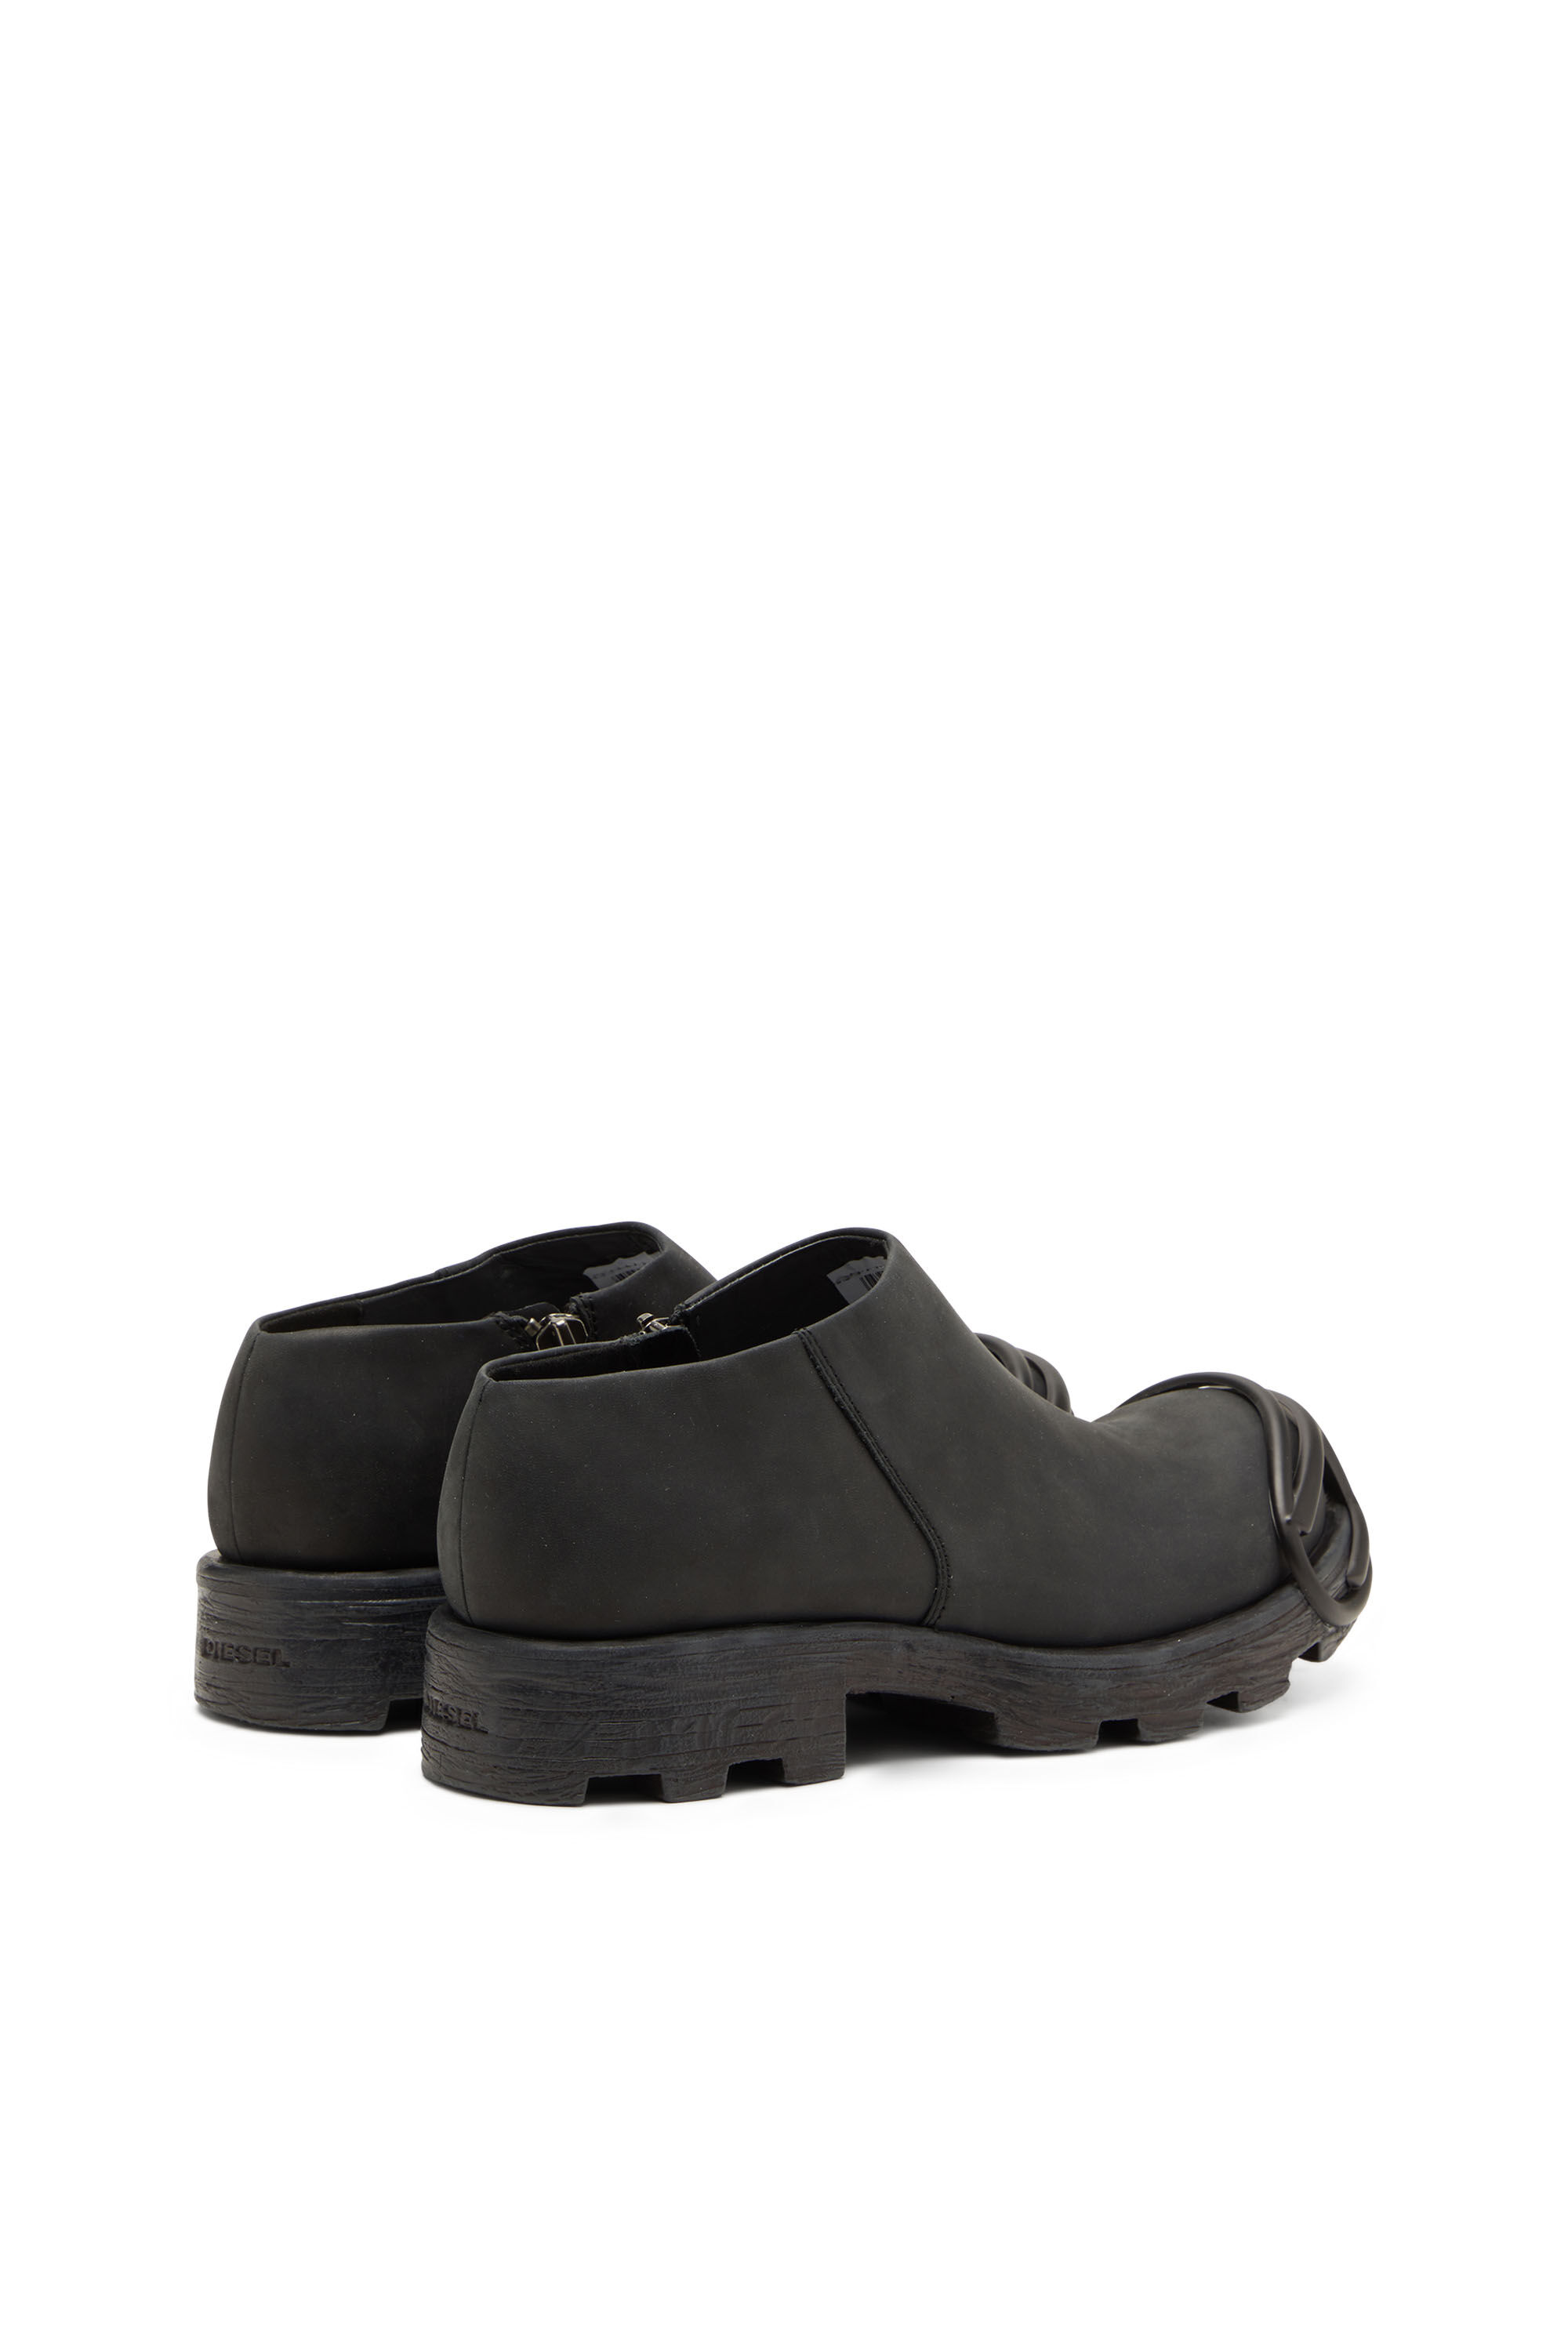 Diesel - D-HAMMER AB D, Man D-Hammer Ab D Boots - Low-cut boots with oval D toe guard in Black - Image 3